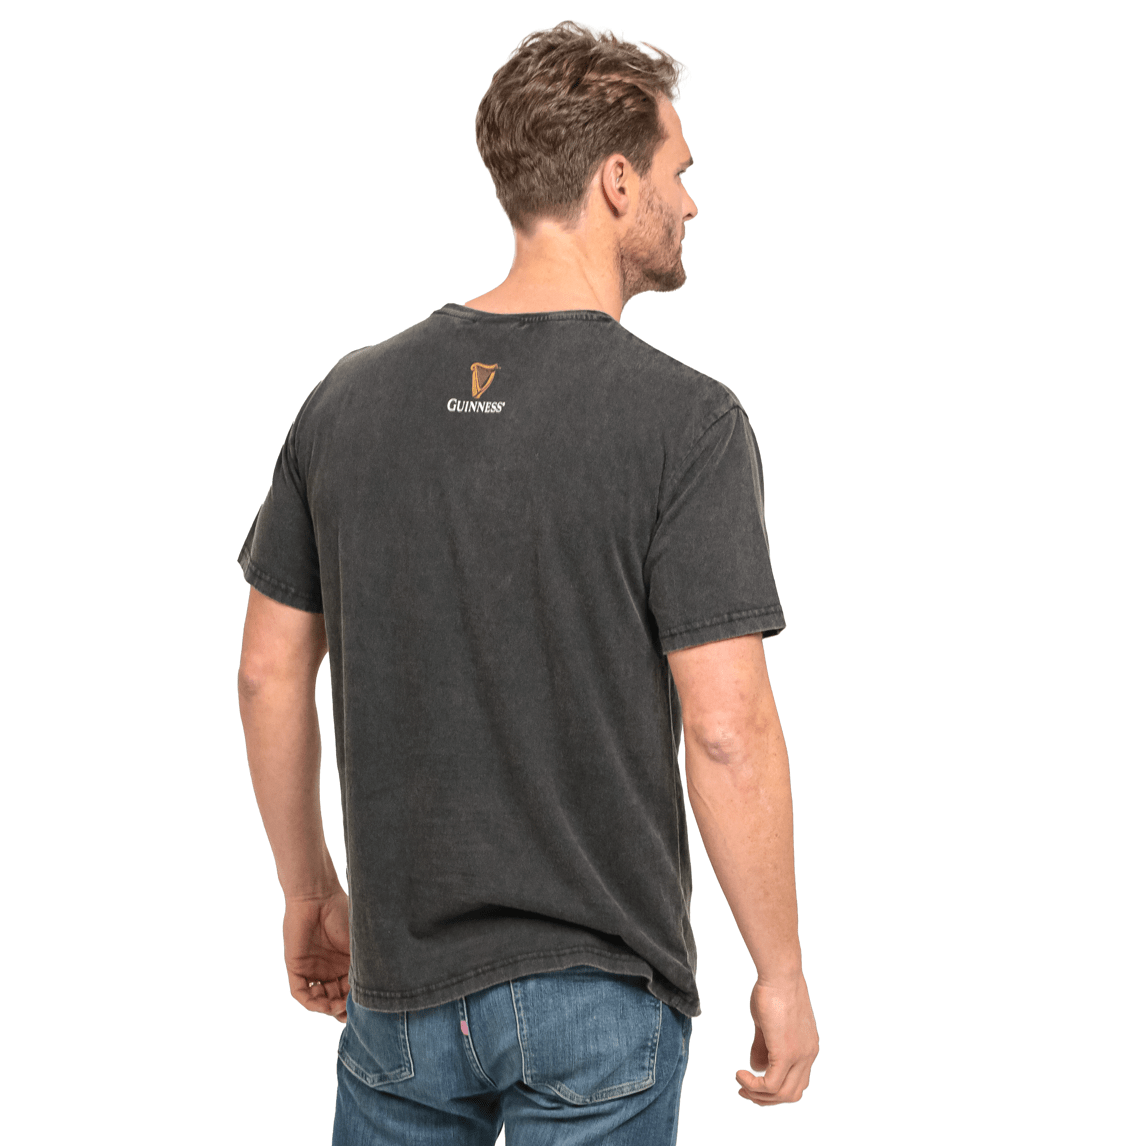 The back of a man wearing jeans and a t-shirt with a Guinness Evolution Harp Tee logo.